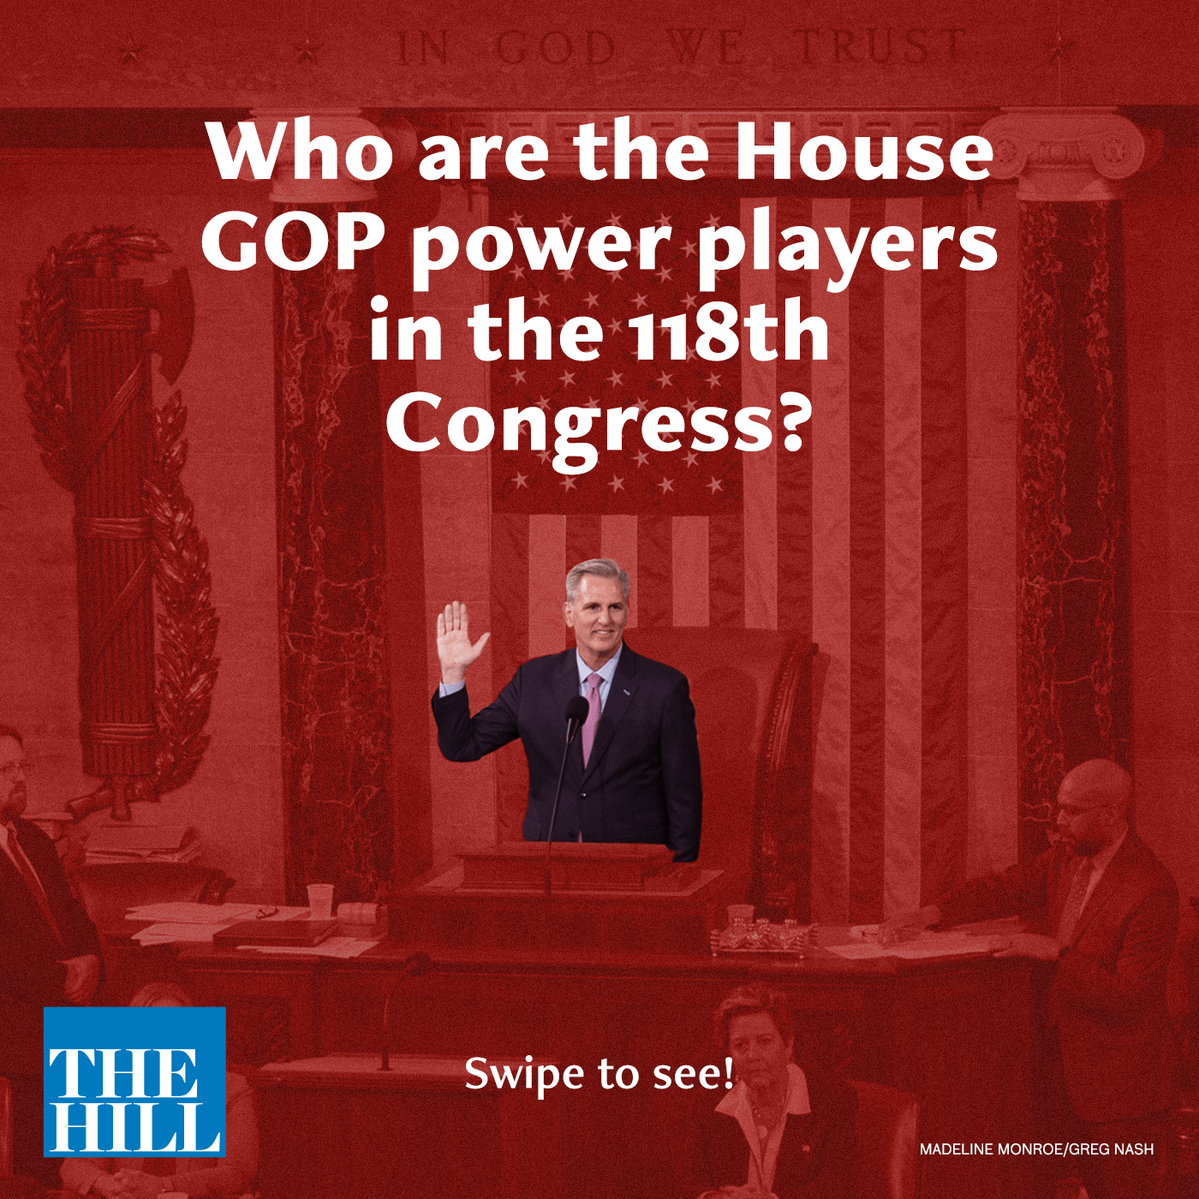 Photo illustration for Instagram with blue Hill logo at the bottom. Kevin McCarthy, center, raising his hand in low-opacity Speaker’s chair and surrounding House environment over a textured red background. 